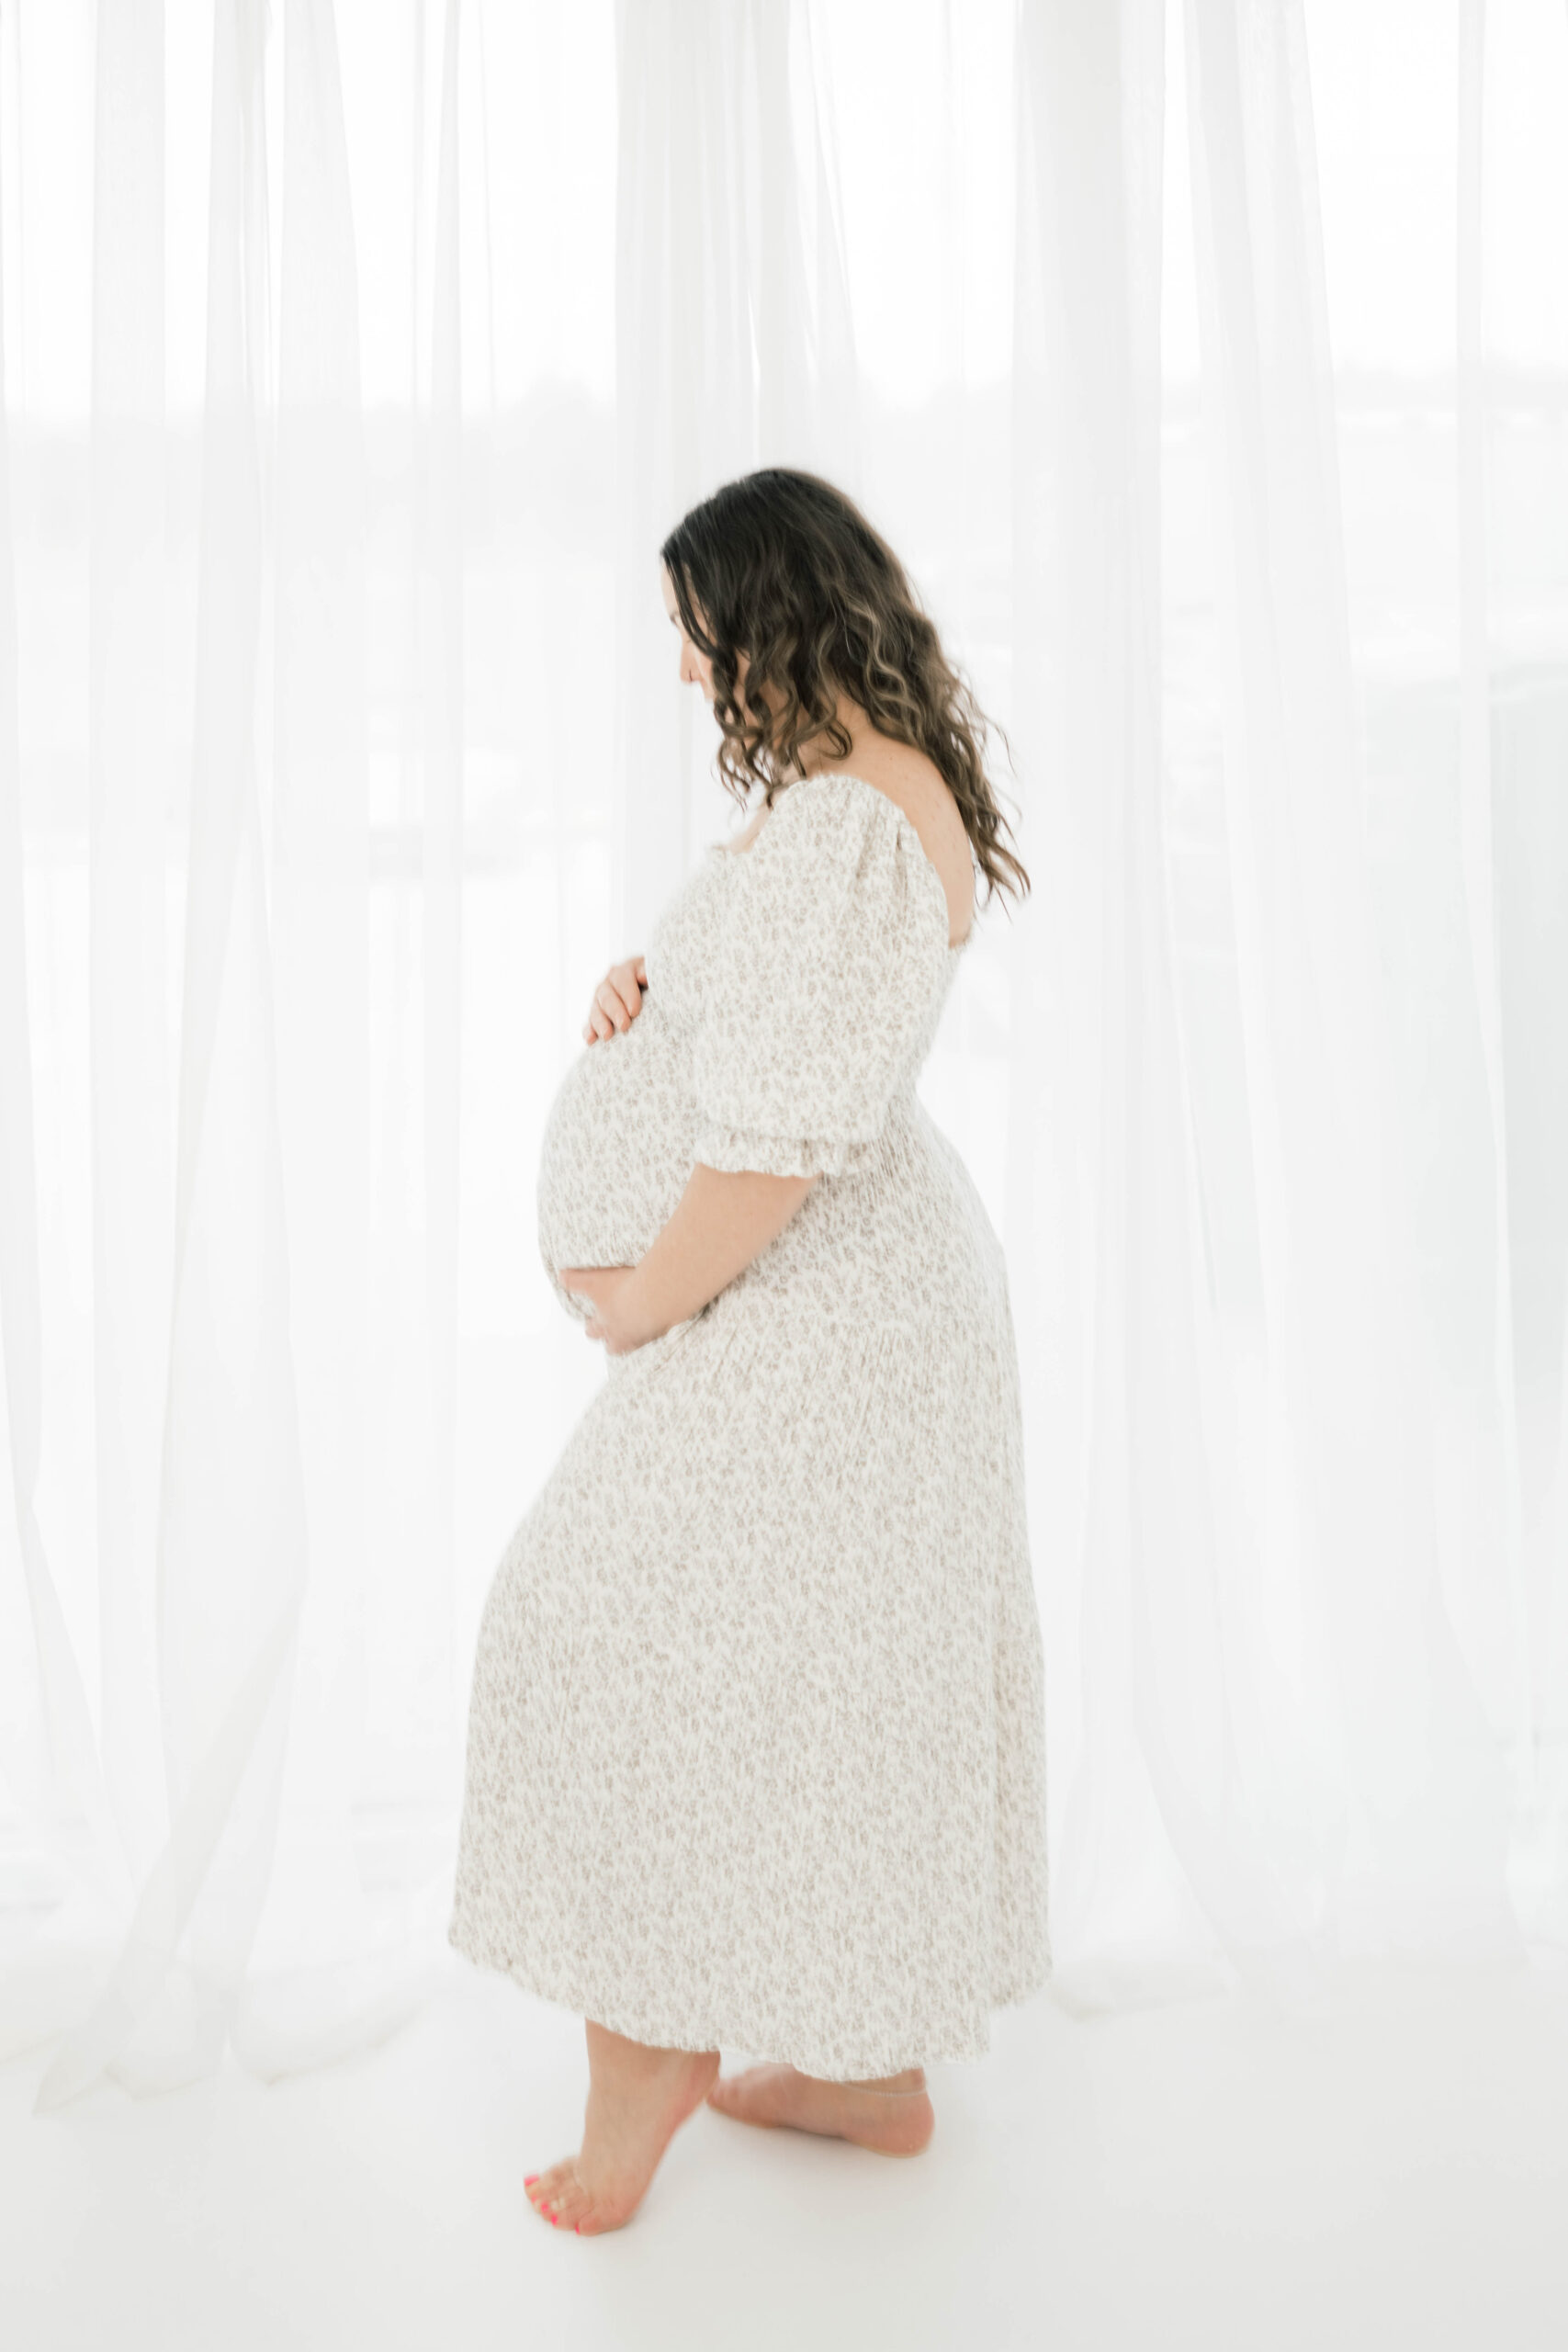 A mother to be stands by a window looking down at her bump with her hands placed on it prenatal chiropractor okc